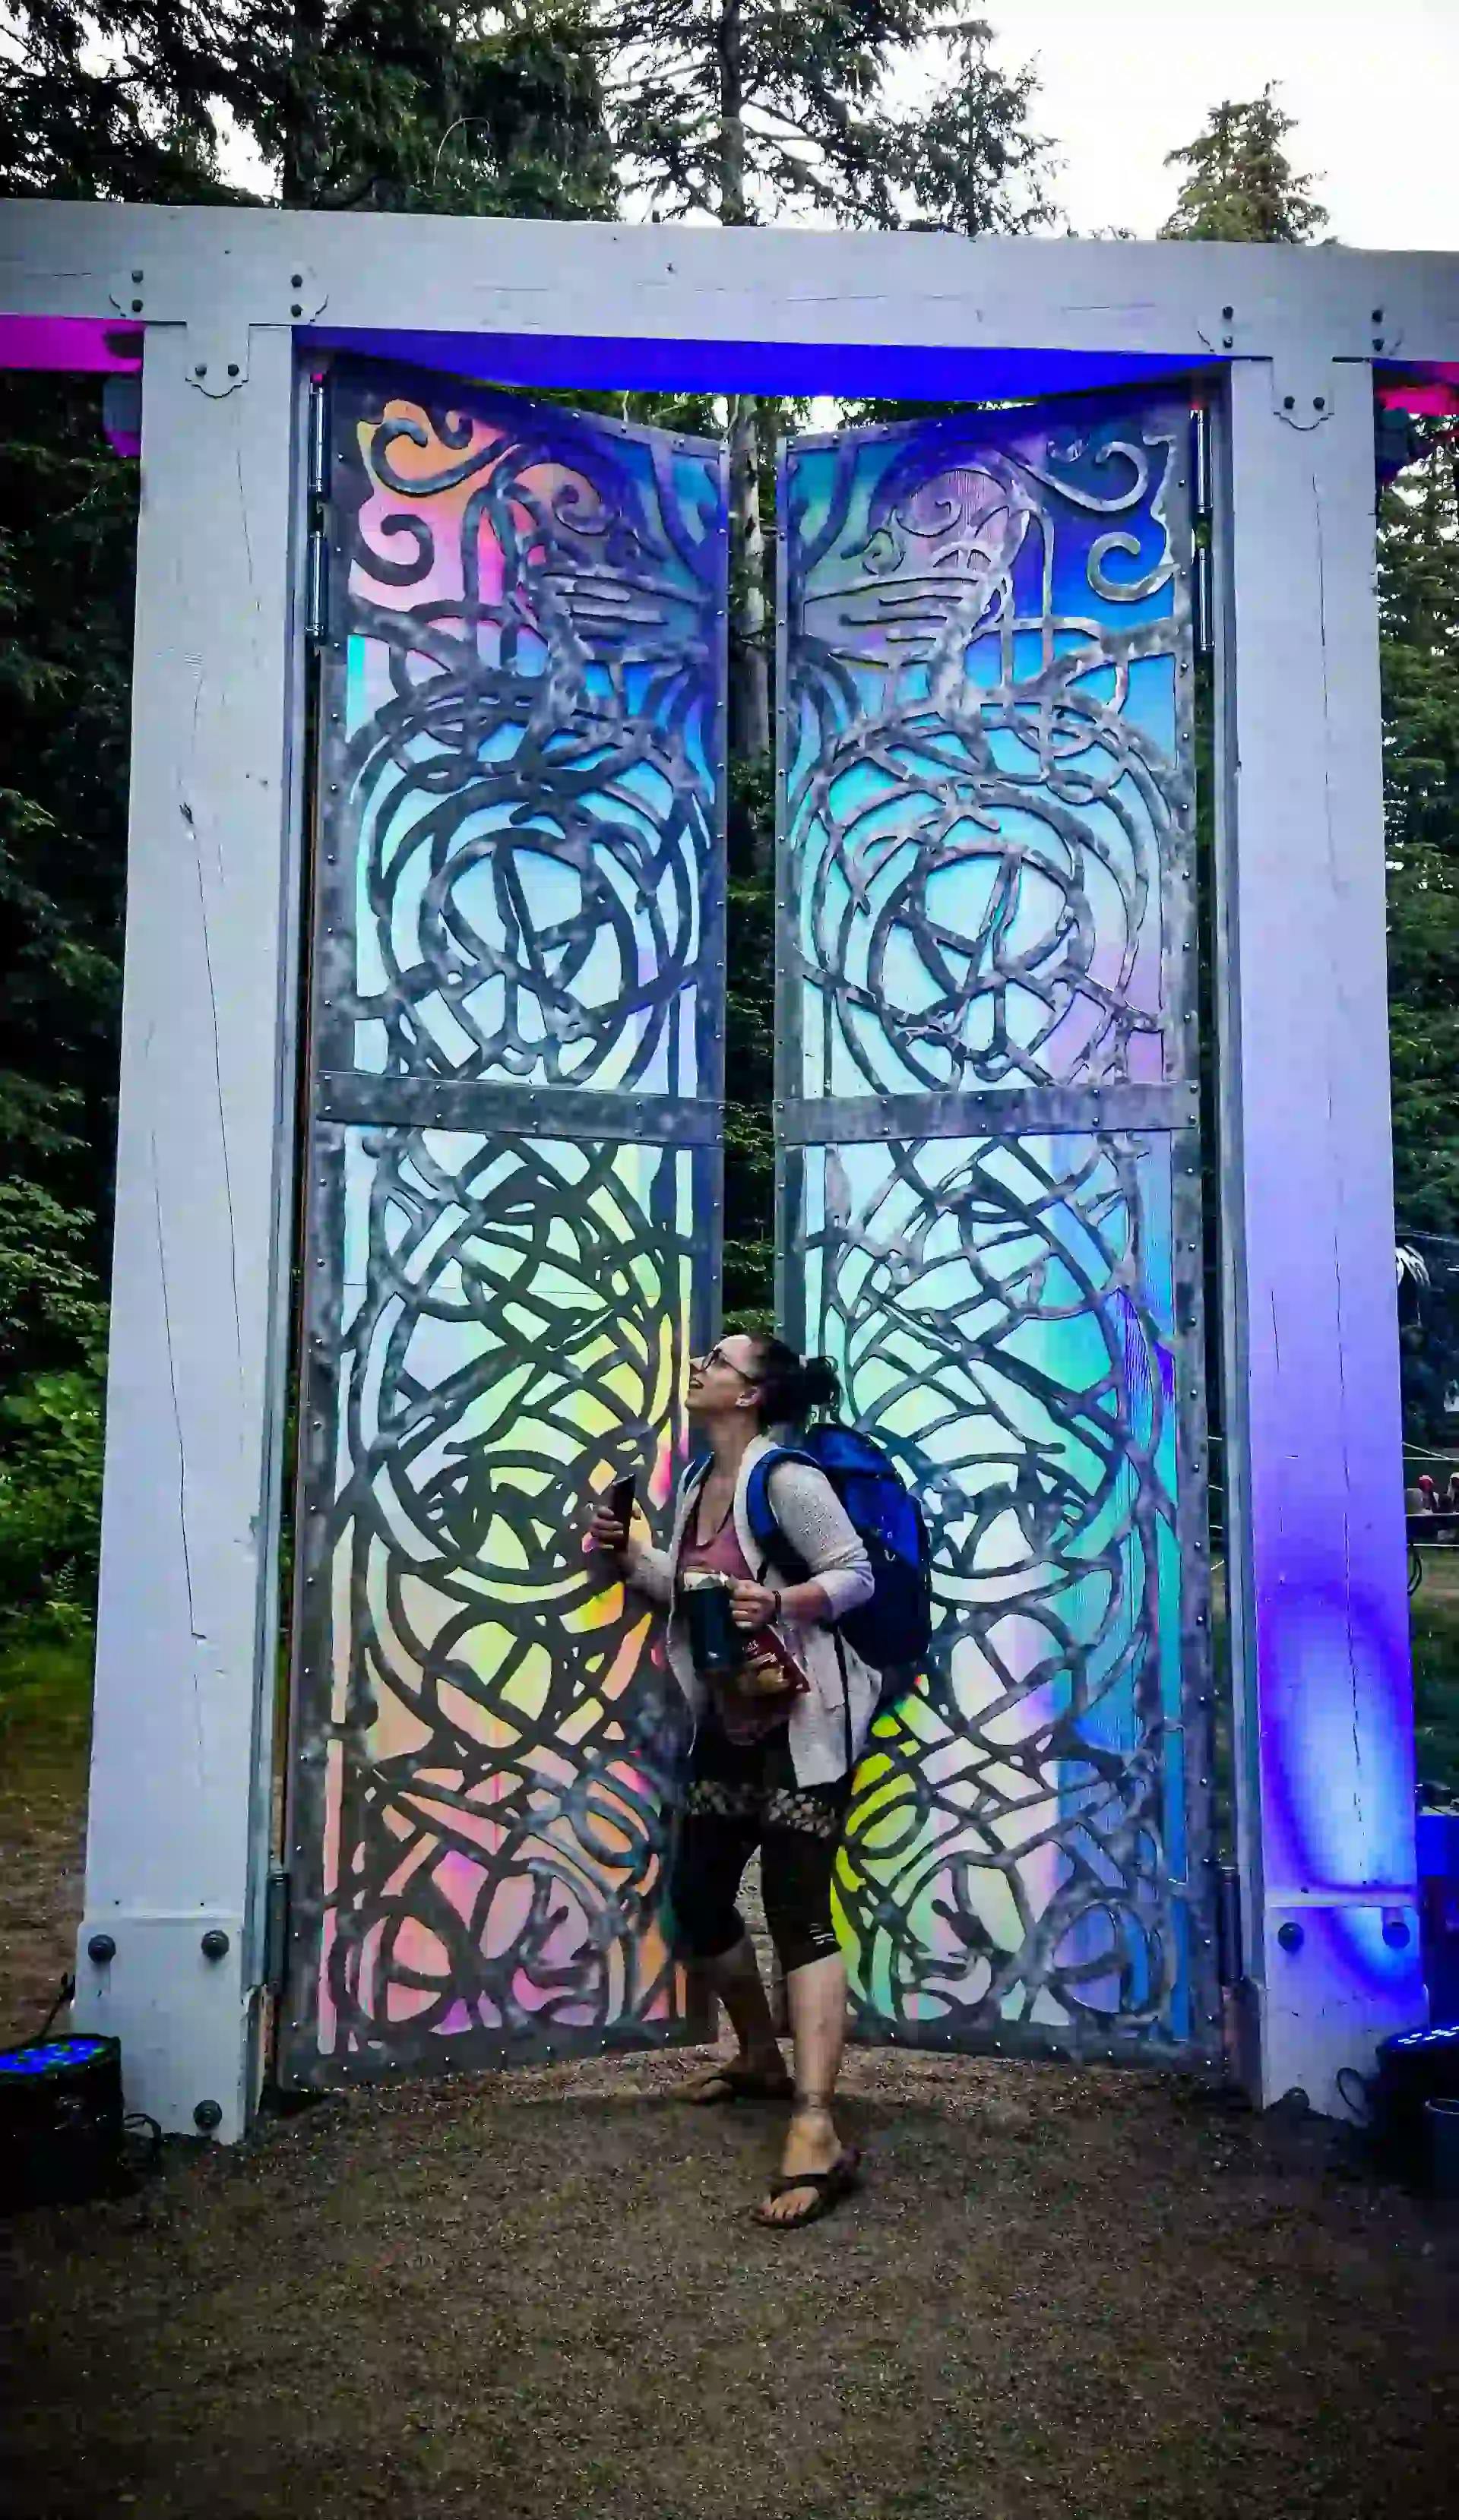 A festival attendee standing before a tall, ornate gate with kaleidoscopic panels.